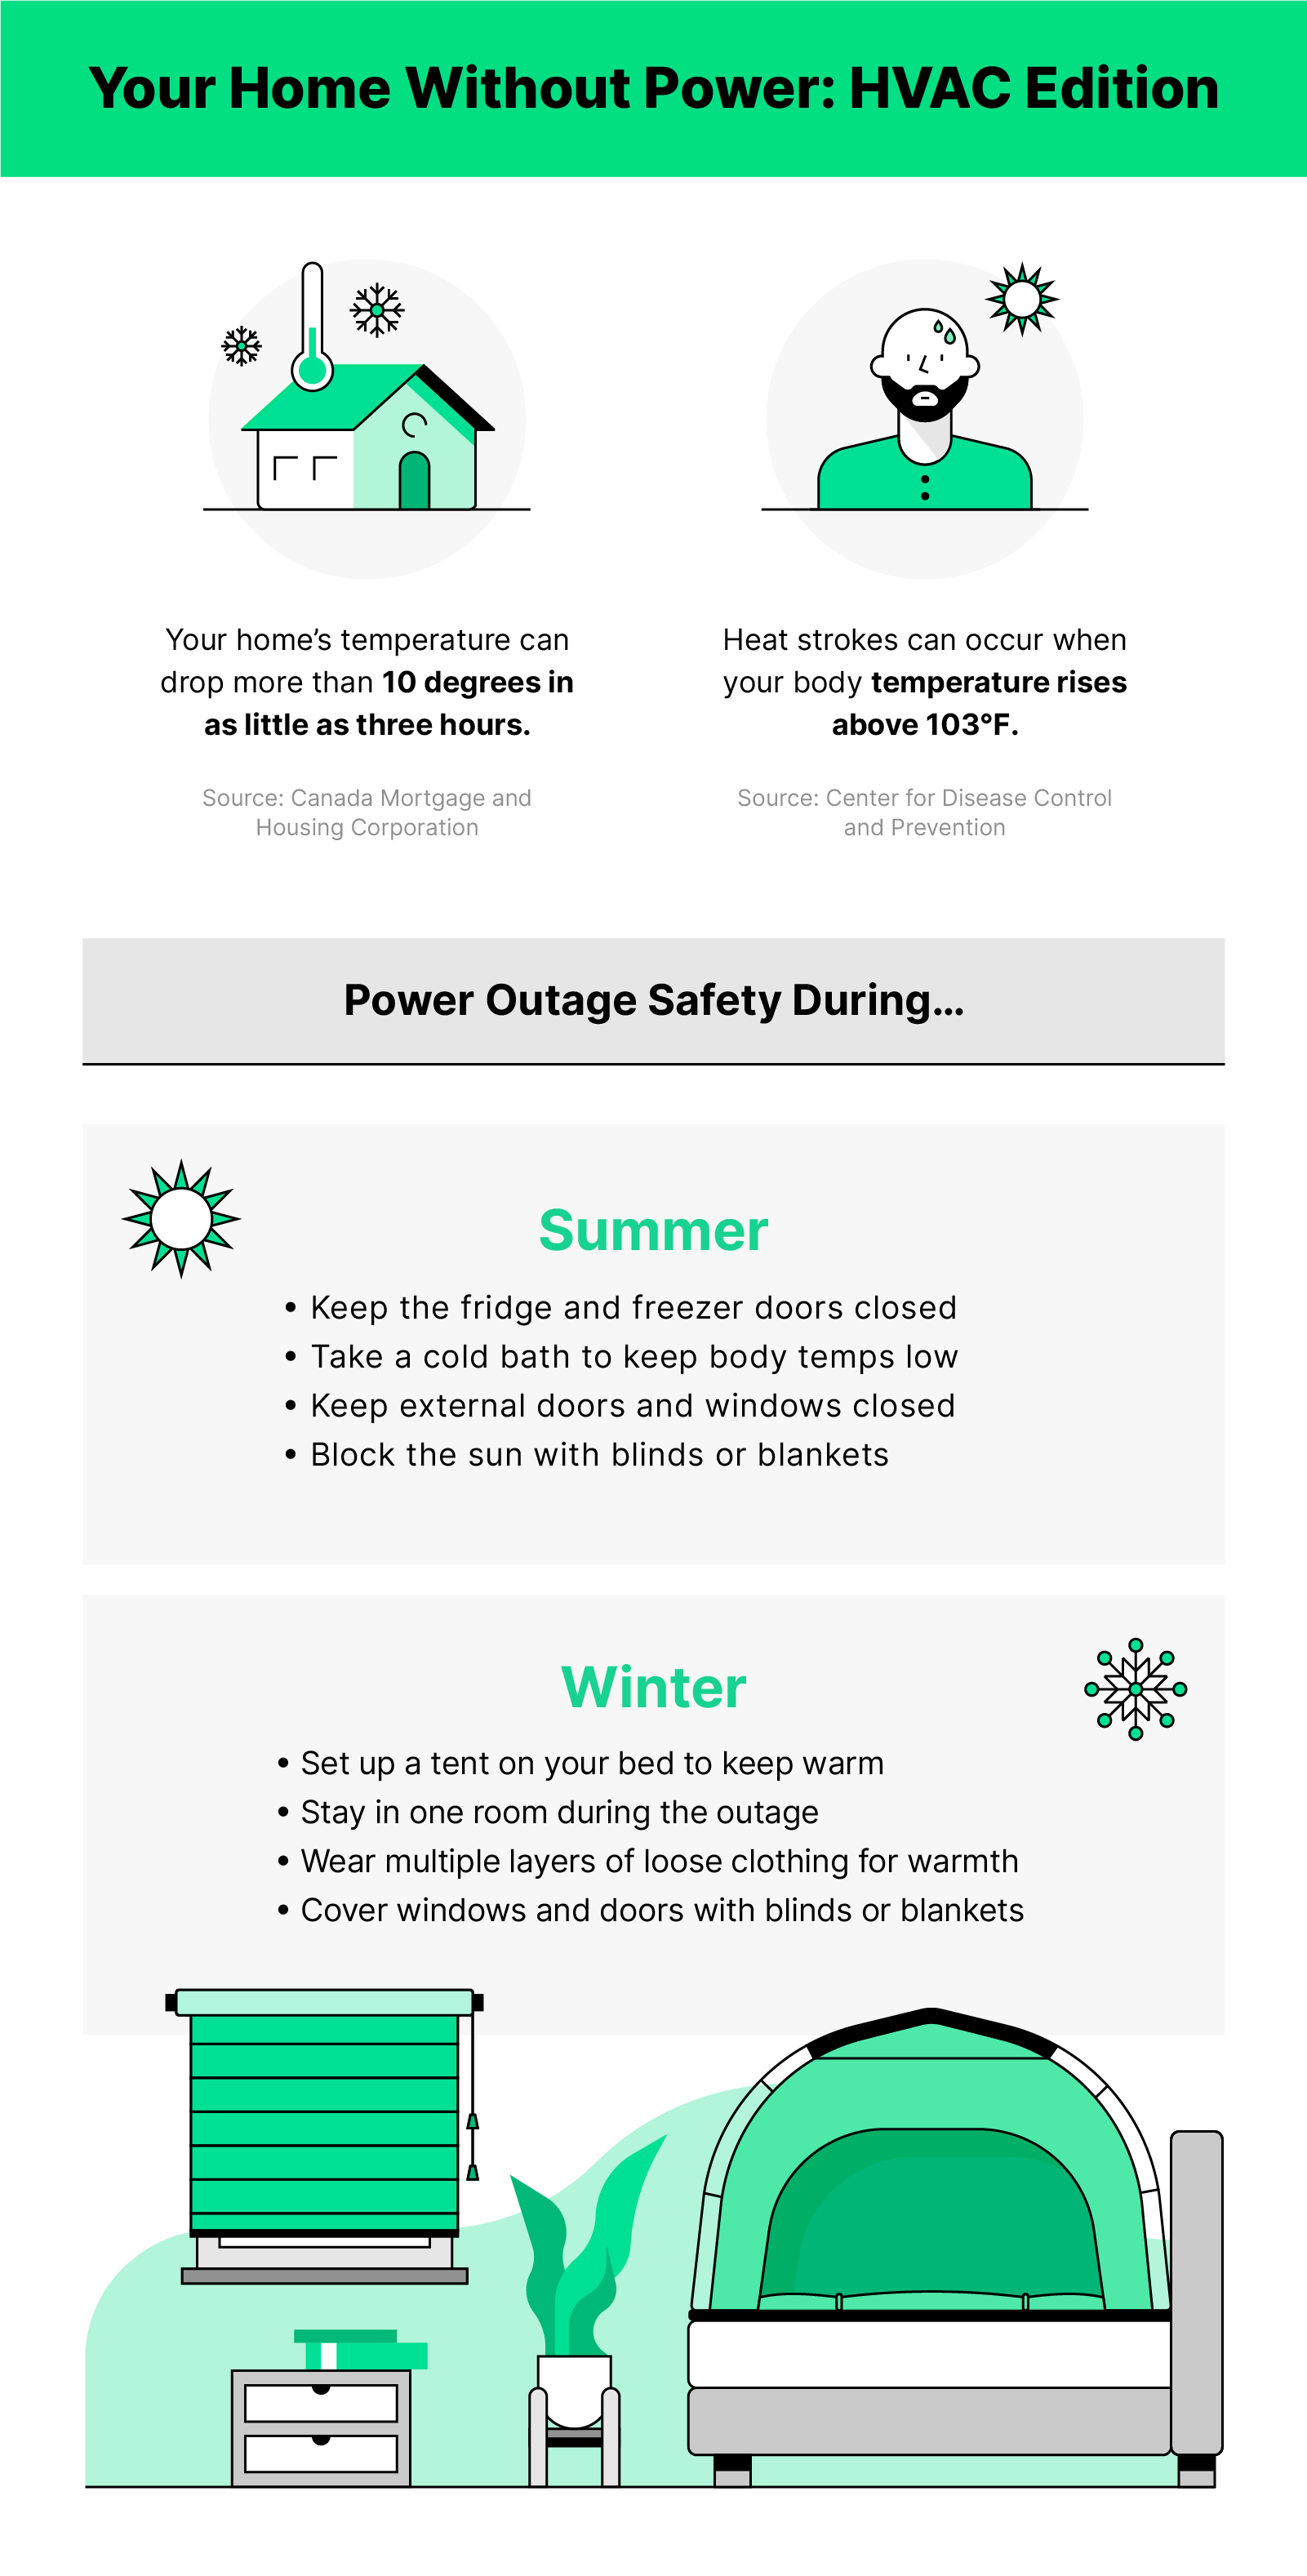 Outage Preparation Tips